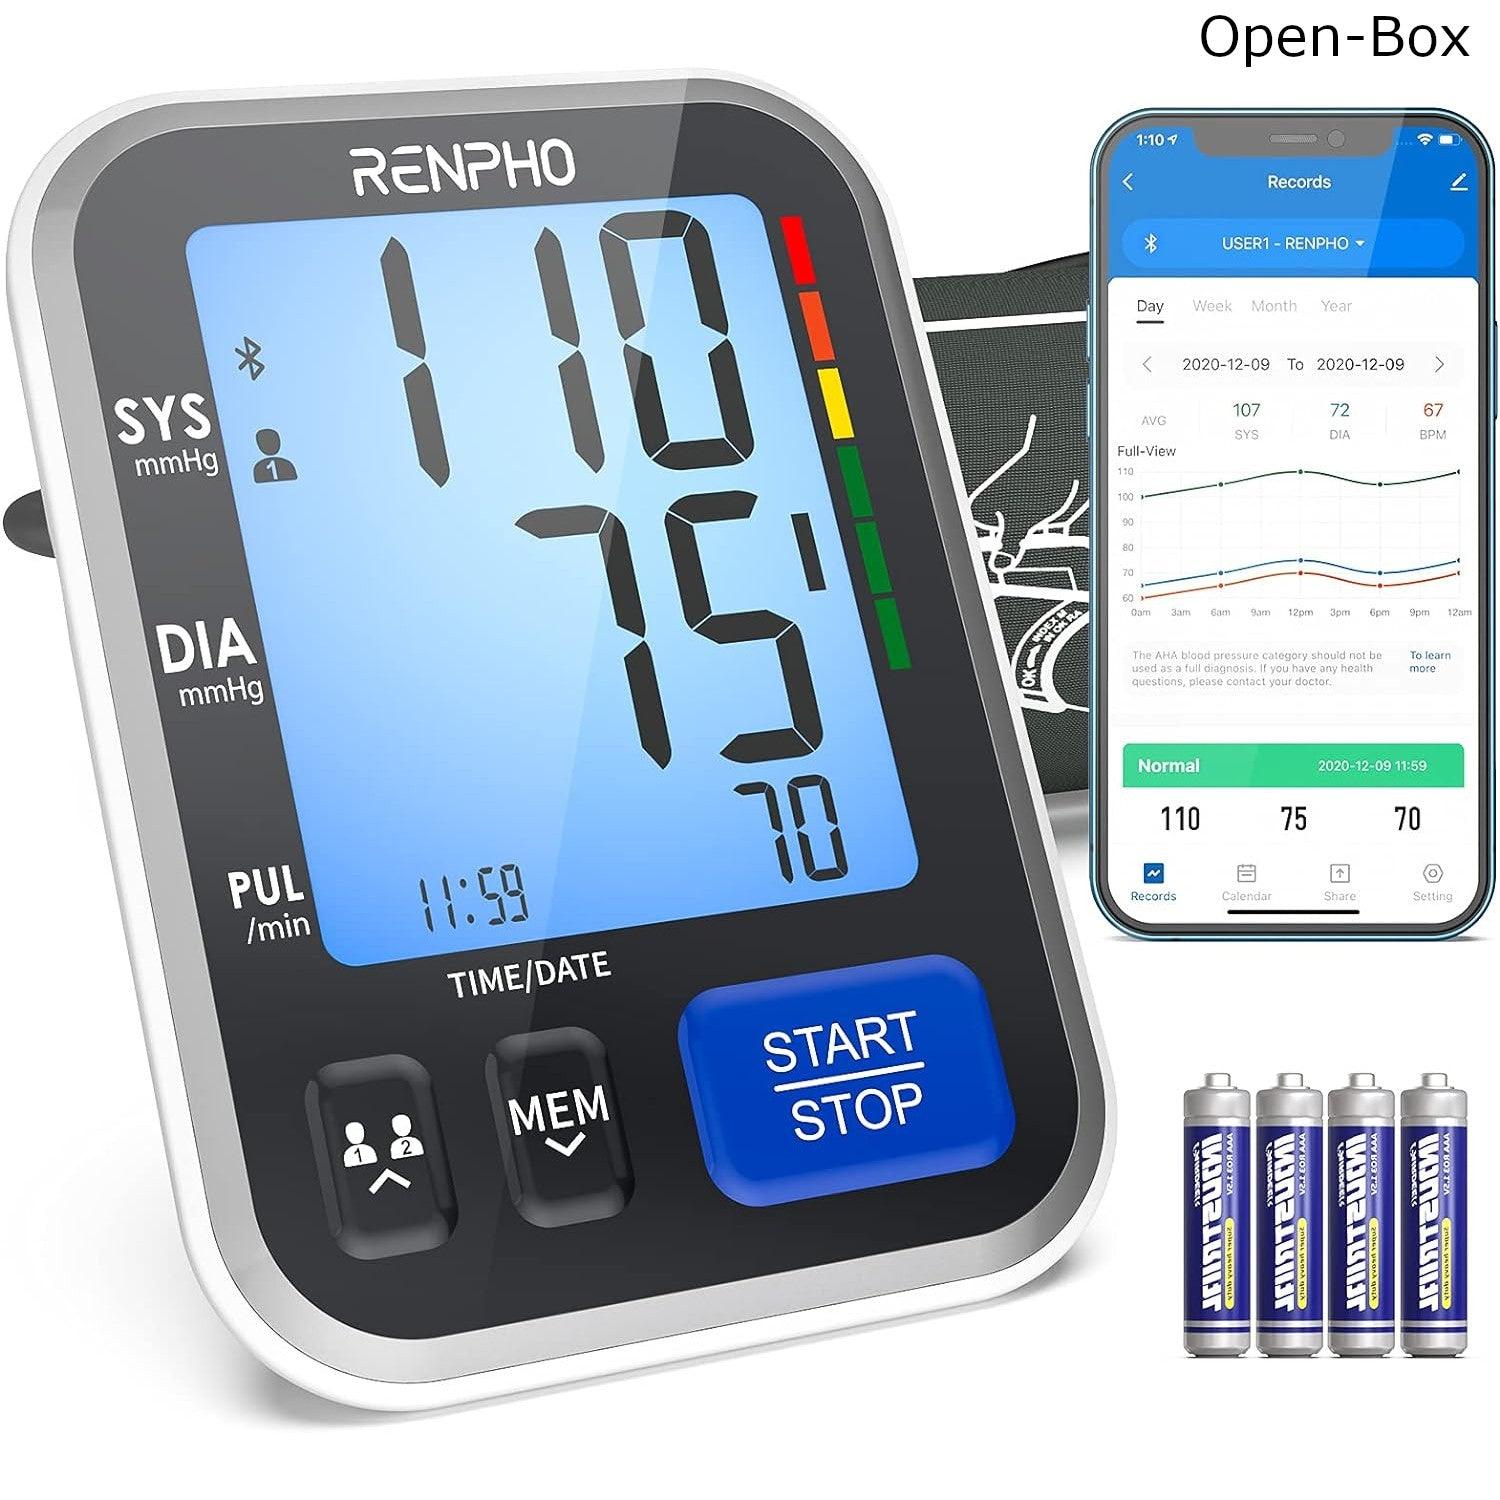 RENPHO Smart Blood Pressure Monitors, Home Use with App Two Users - Massive Discounts